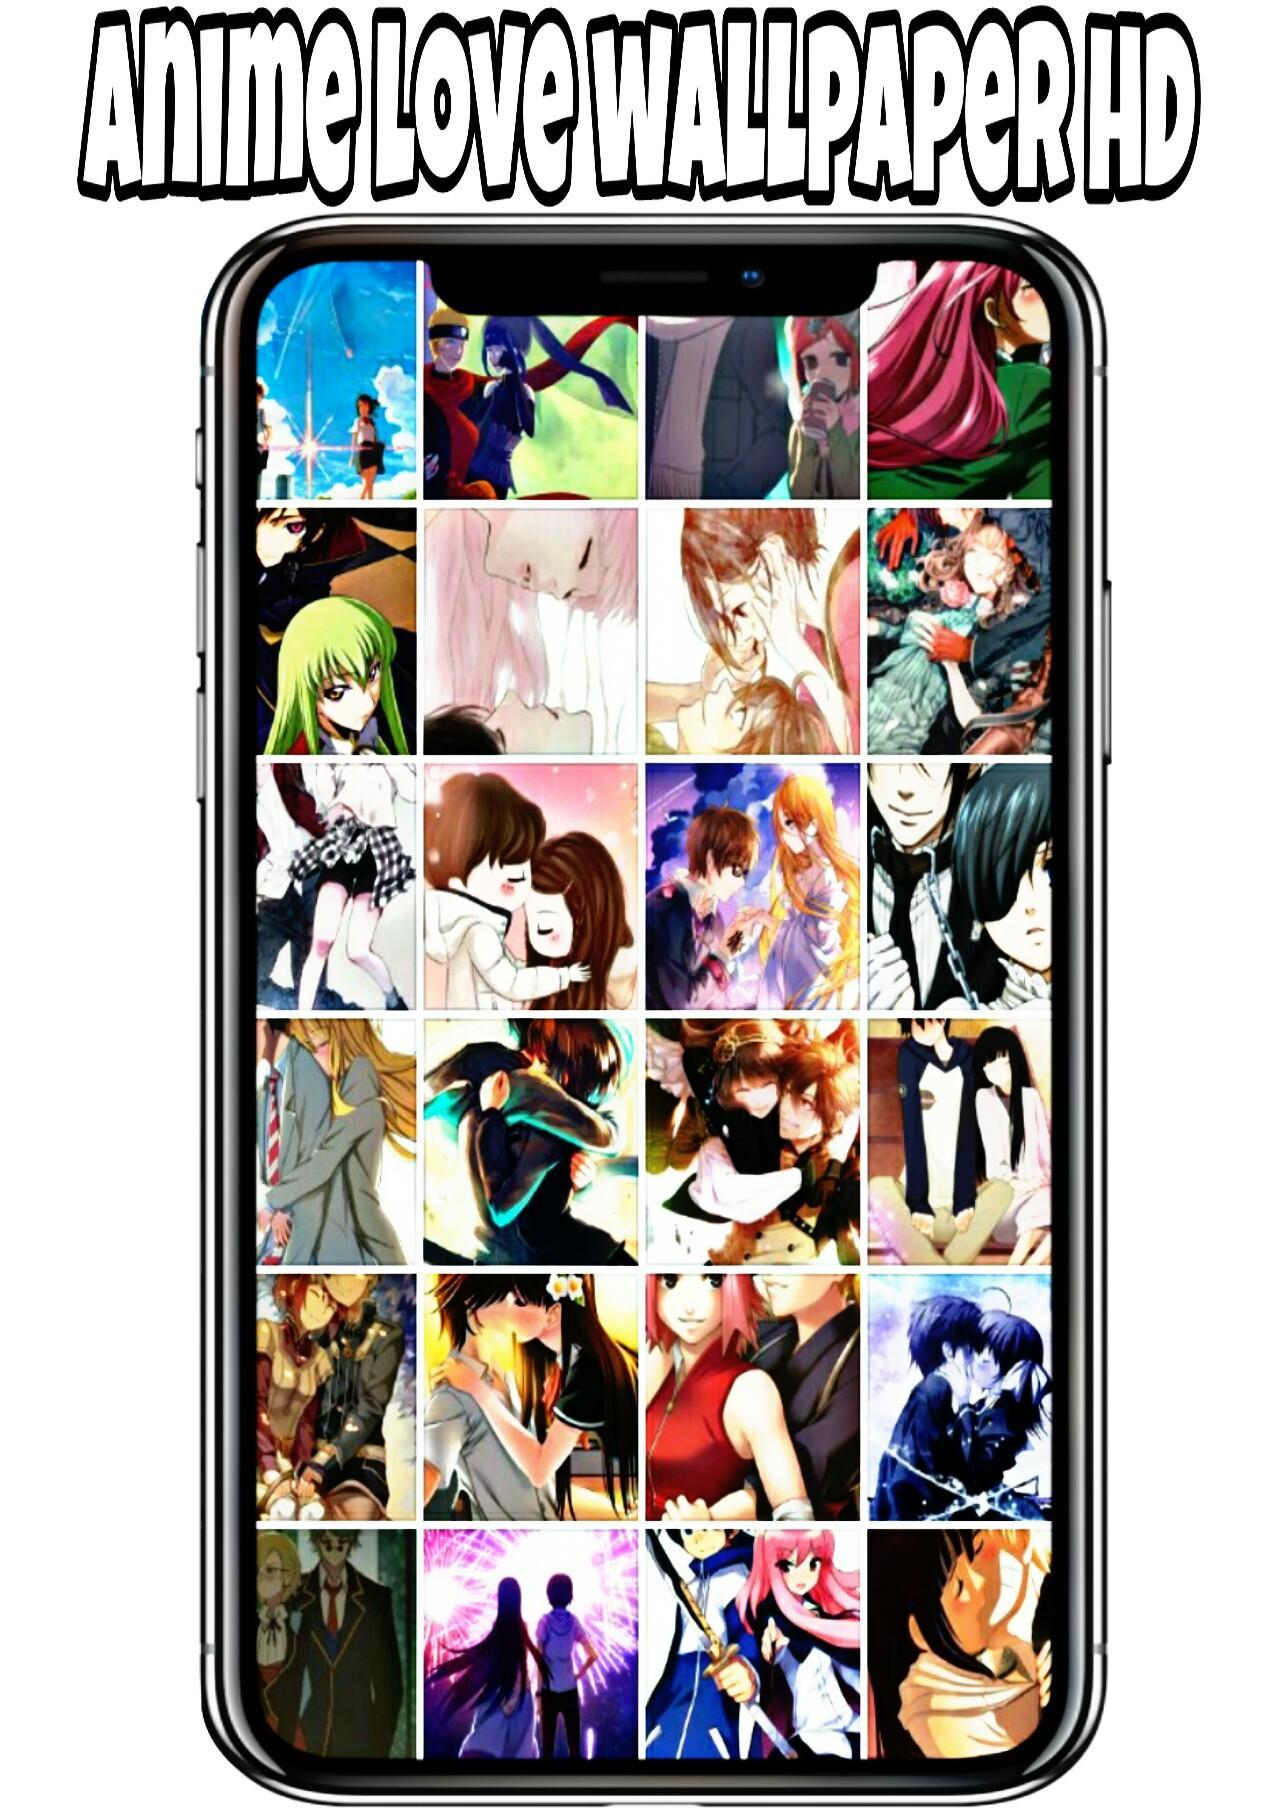 Anime Love Wallpaper Hd For Android Apk Download